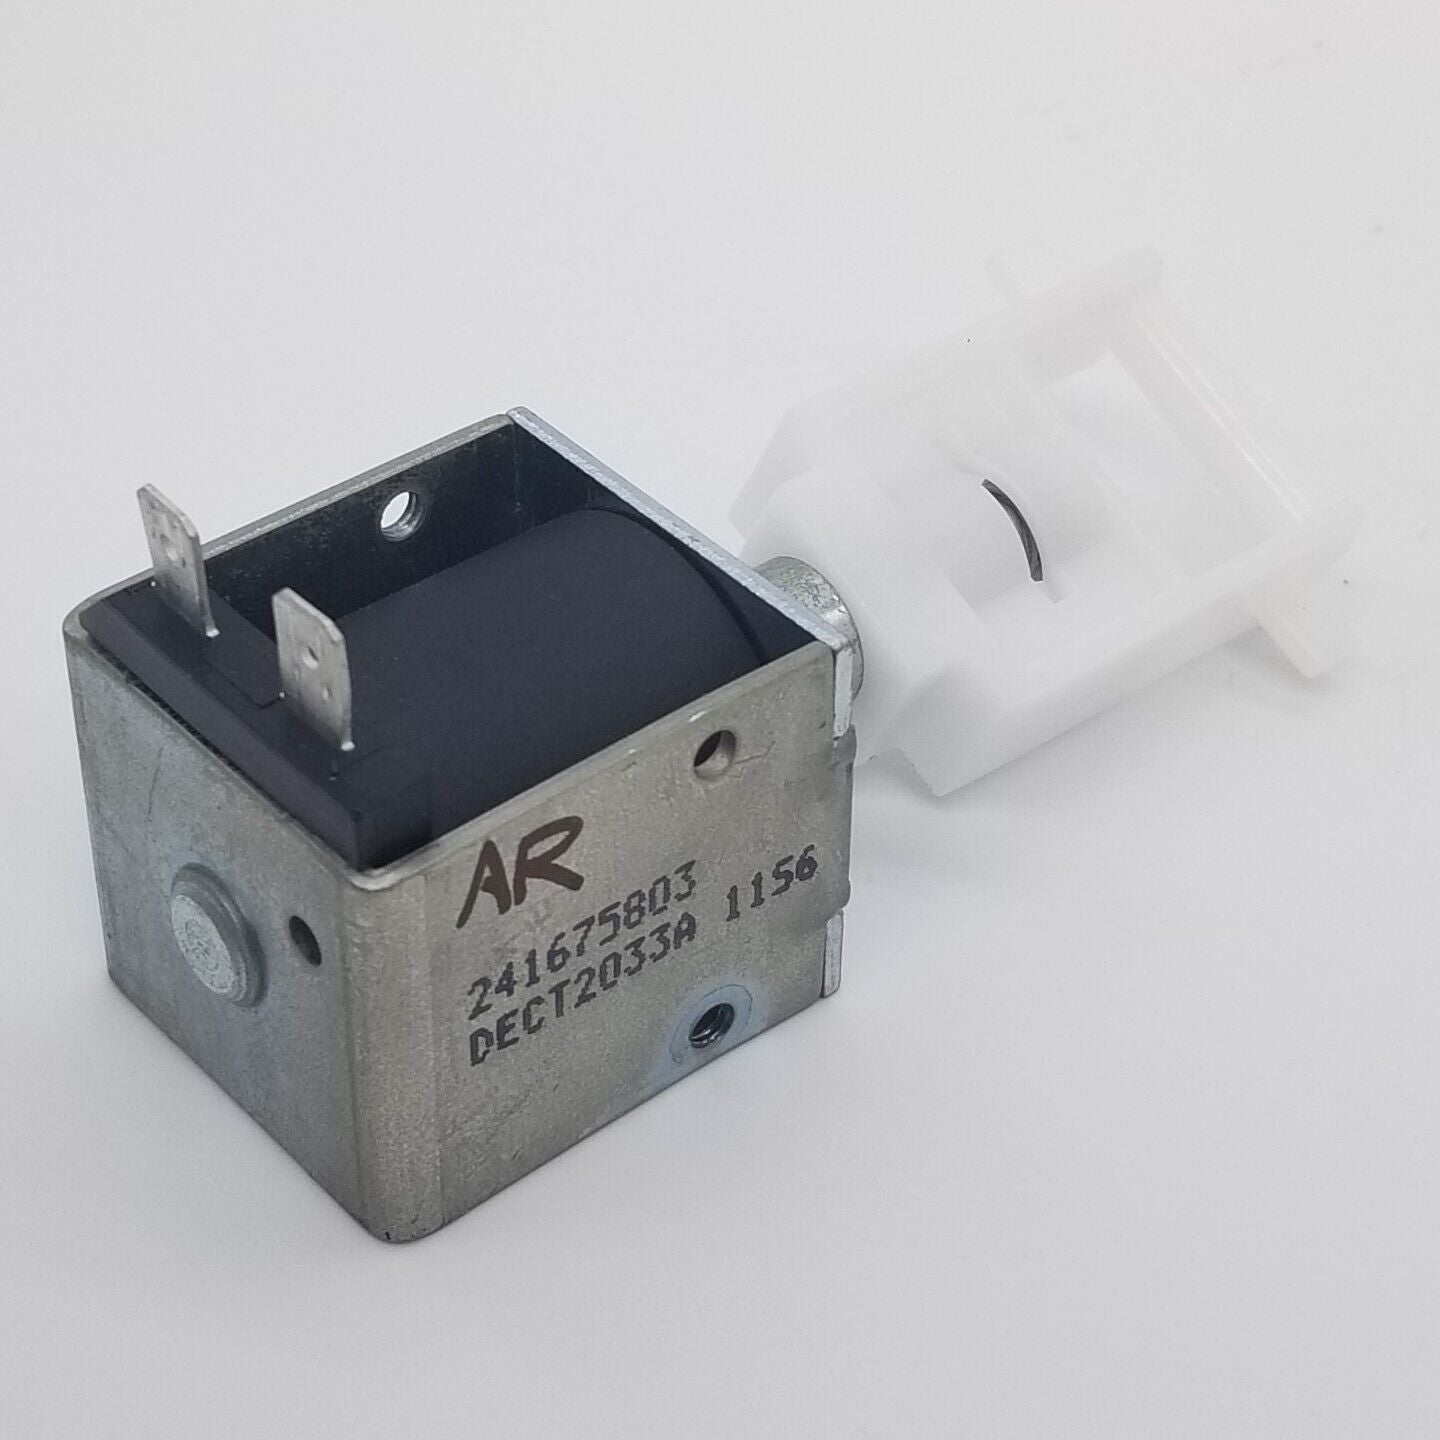 New Genuine OEM Replacement for Frigidaire Refrigerator Solenoid Assy 241675803